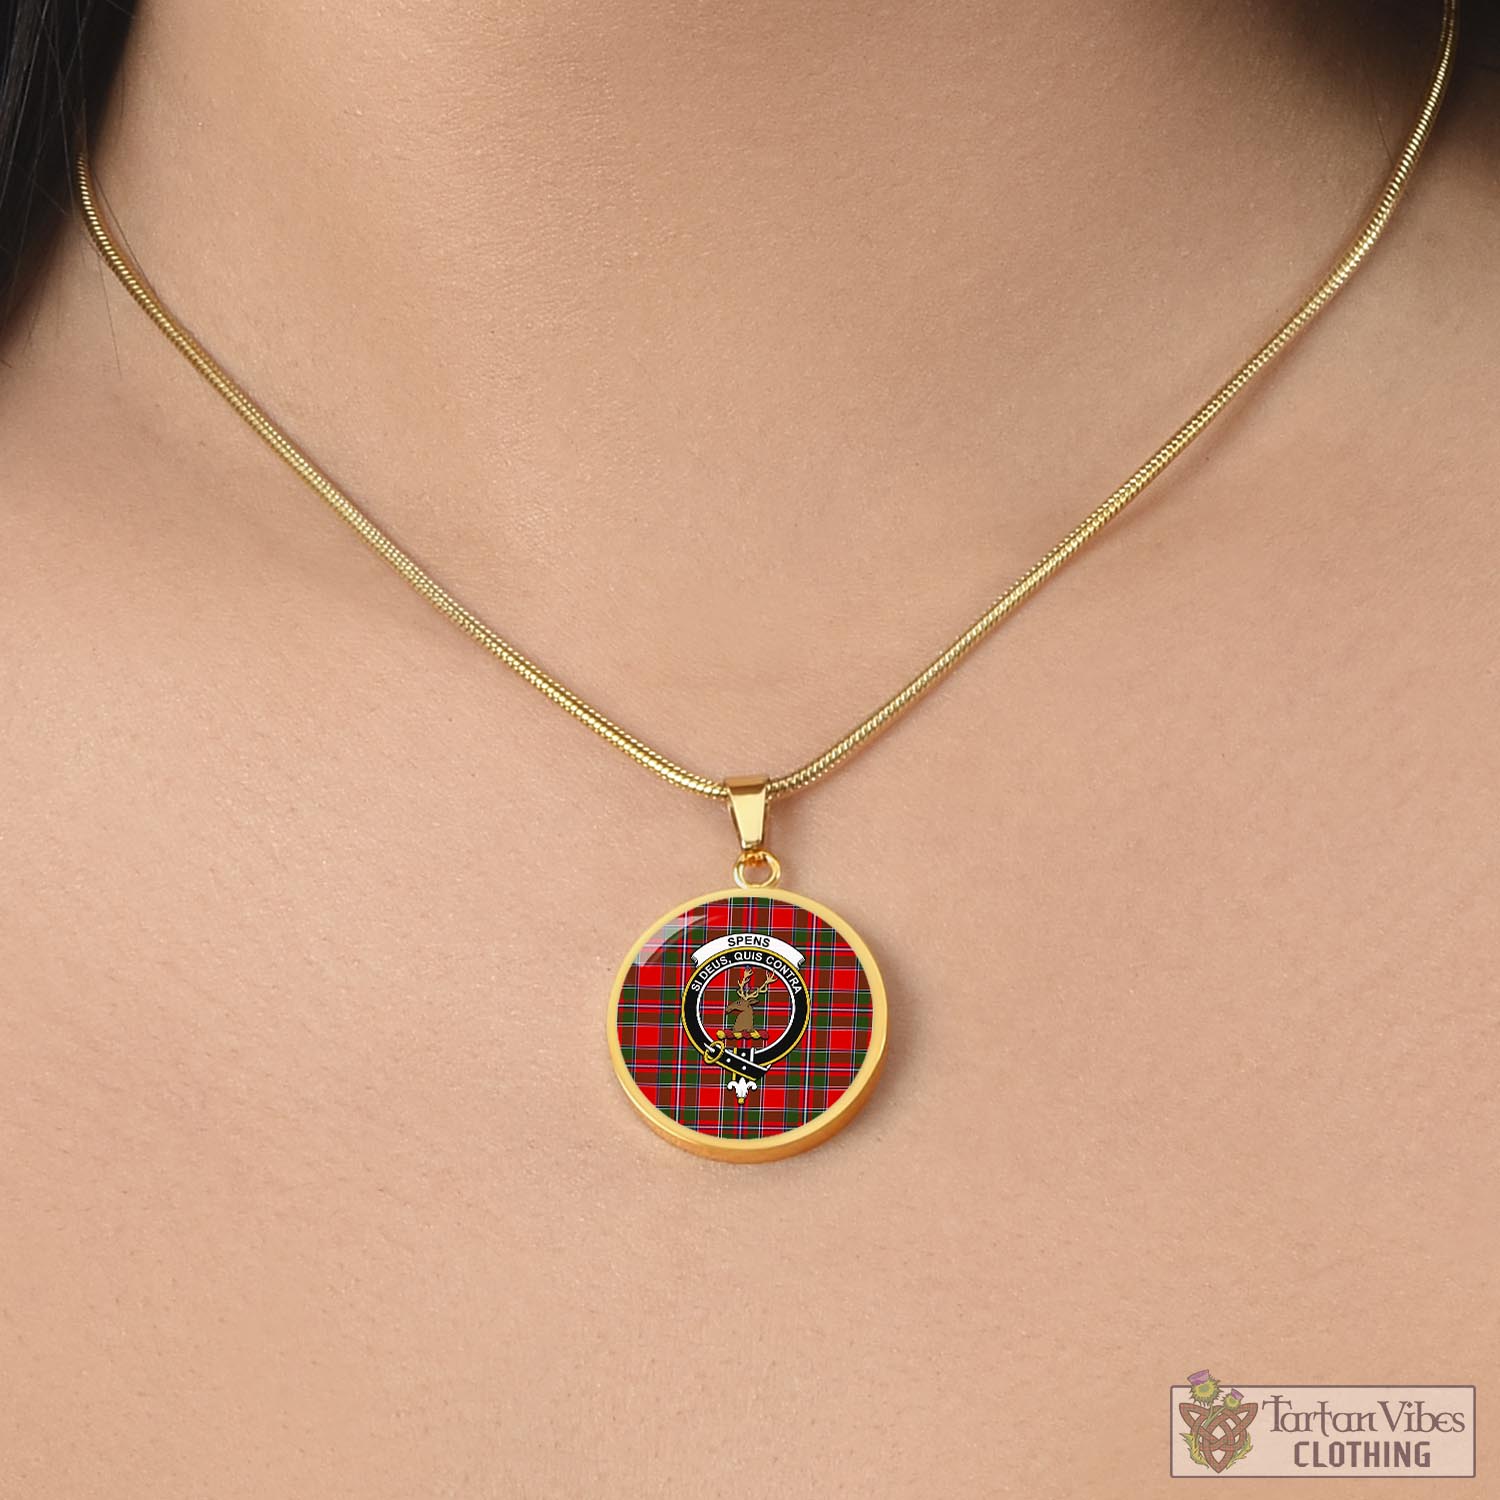 Tartan Vibes Clothing Spens Modern Tartan Circle Necklace with Family Crest